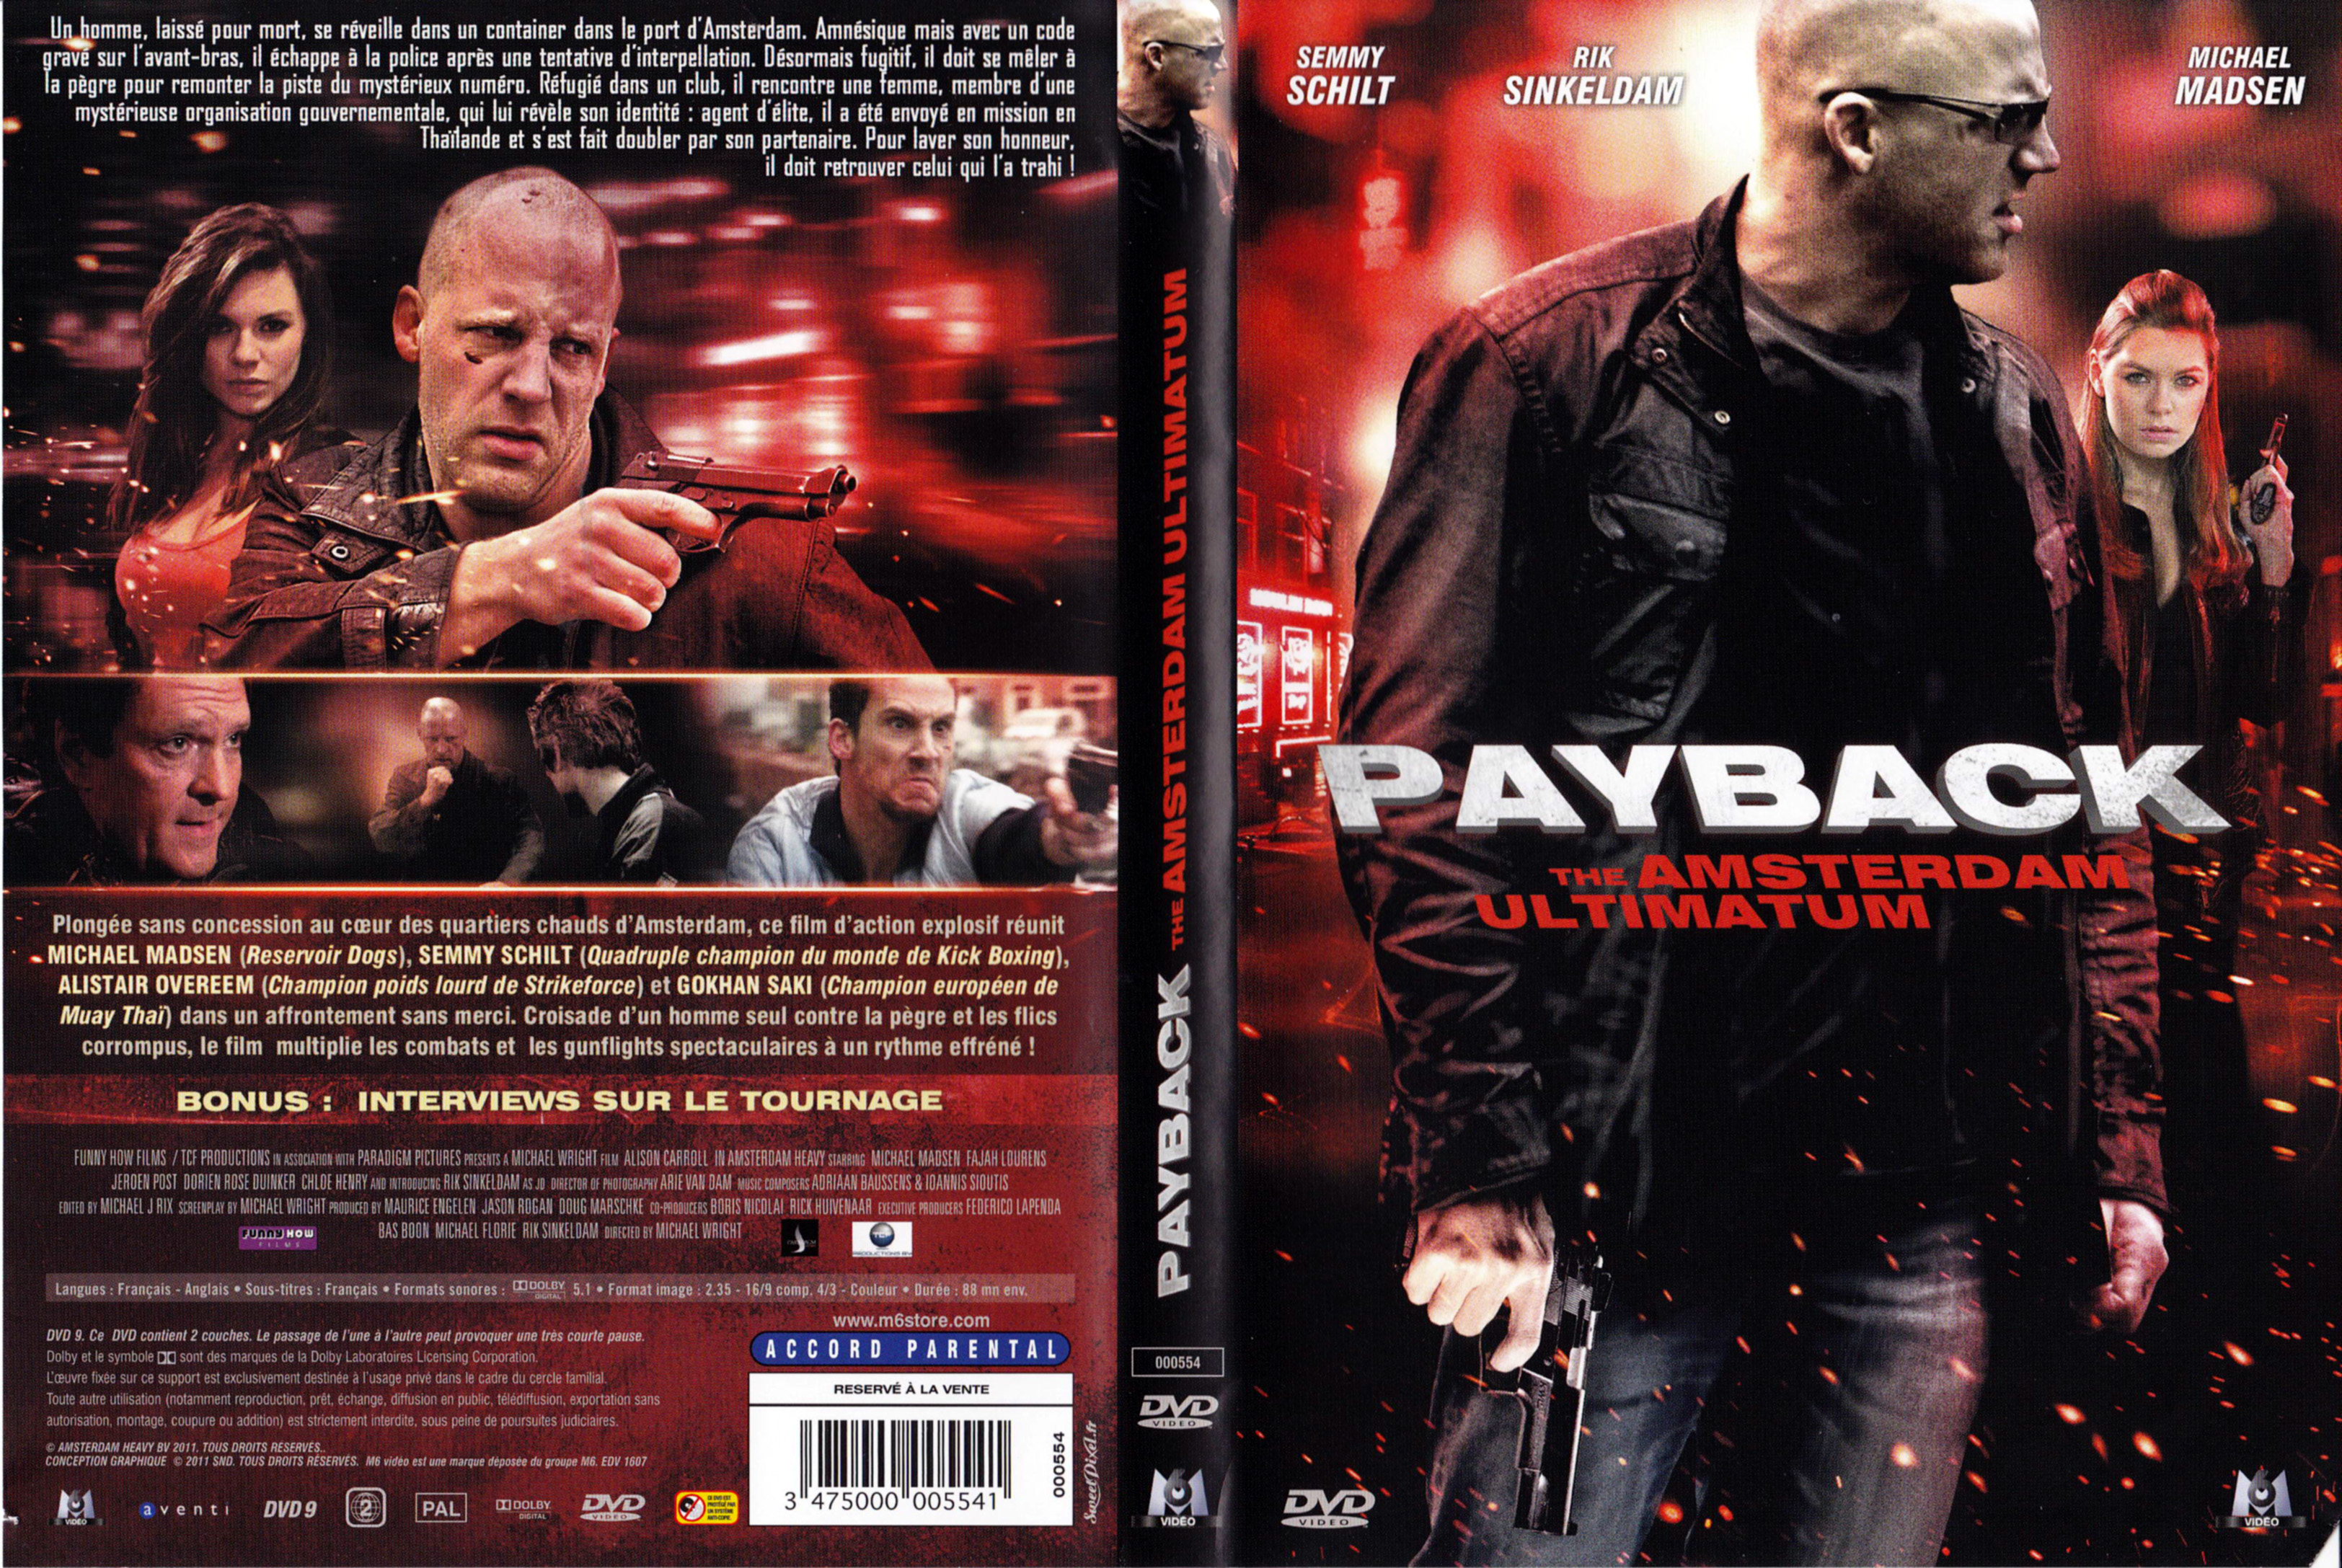 Jaquette DVD Payback The Amsterdam Ultimatum